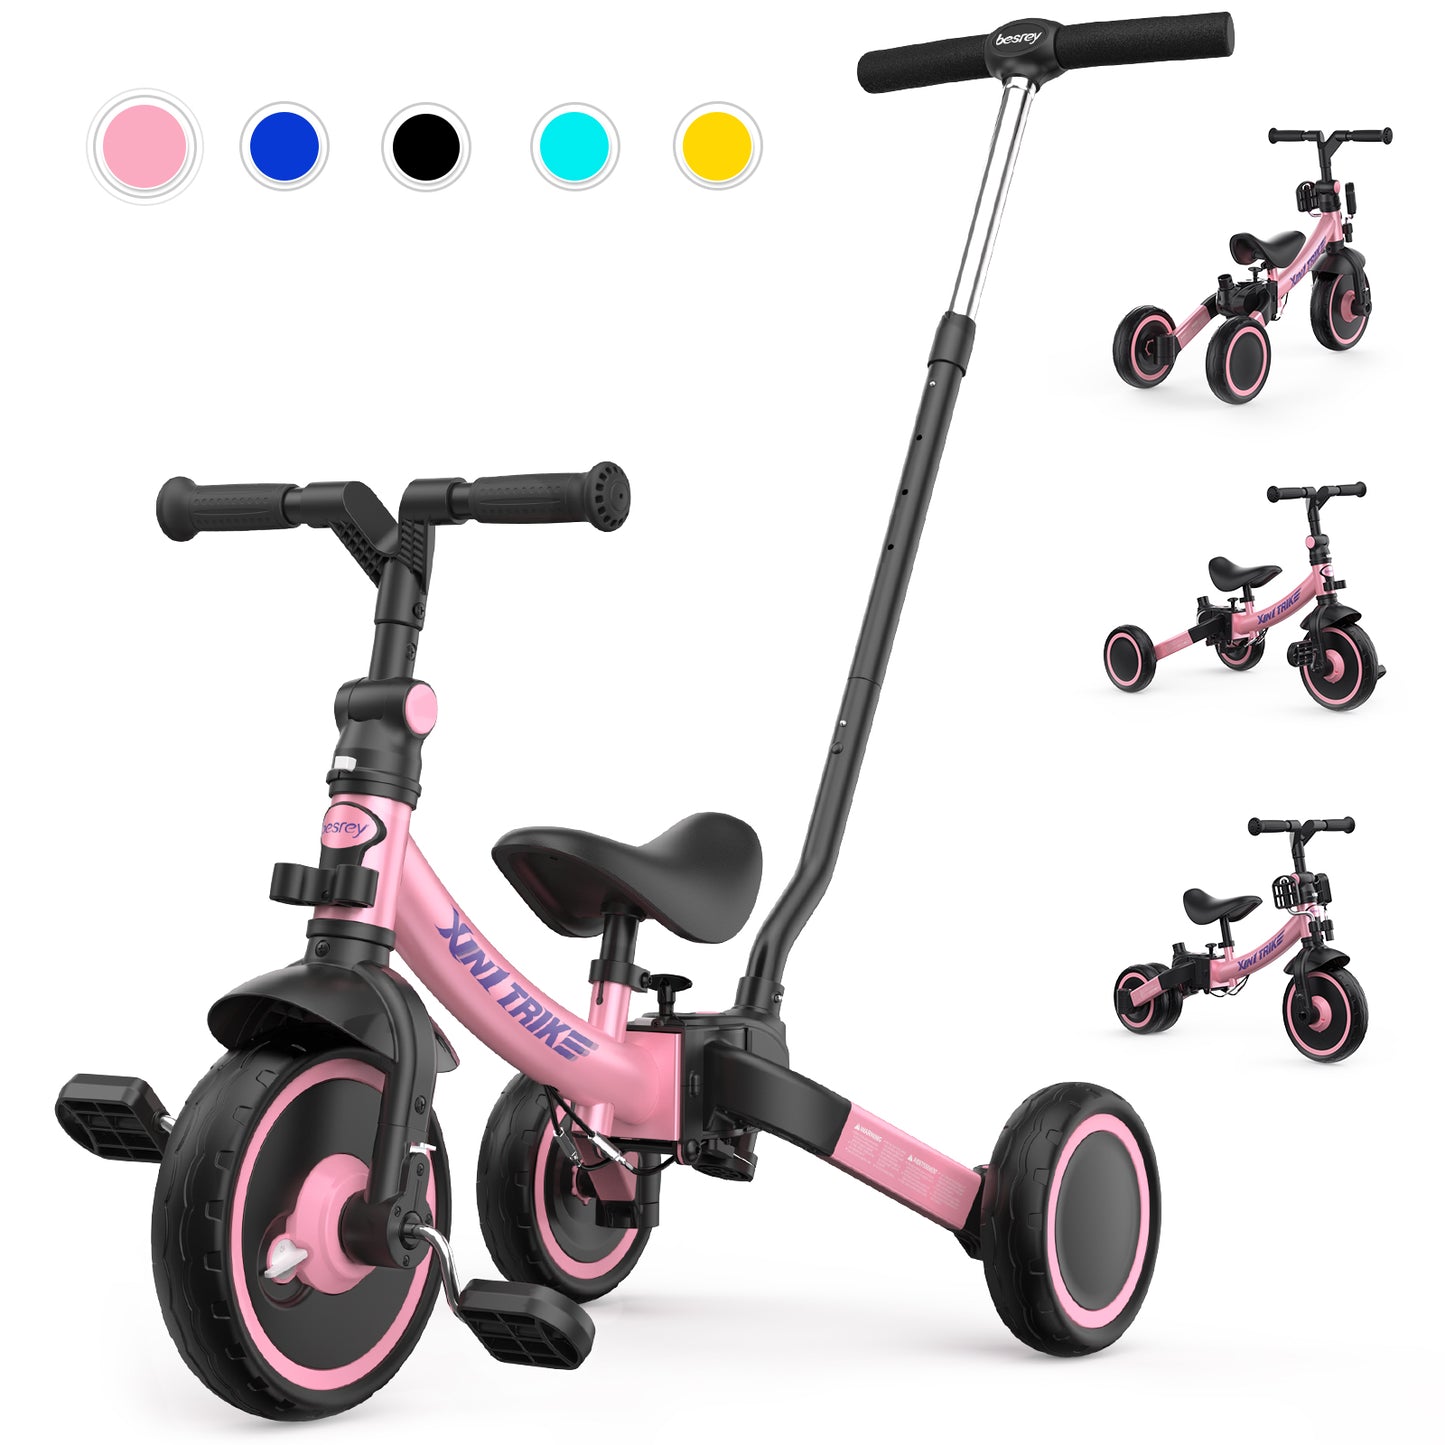 7-in-1 toddler tricycle with push handle pink